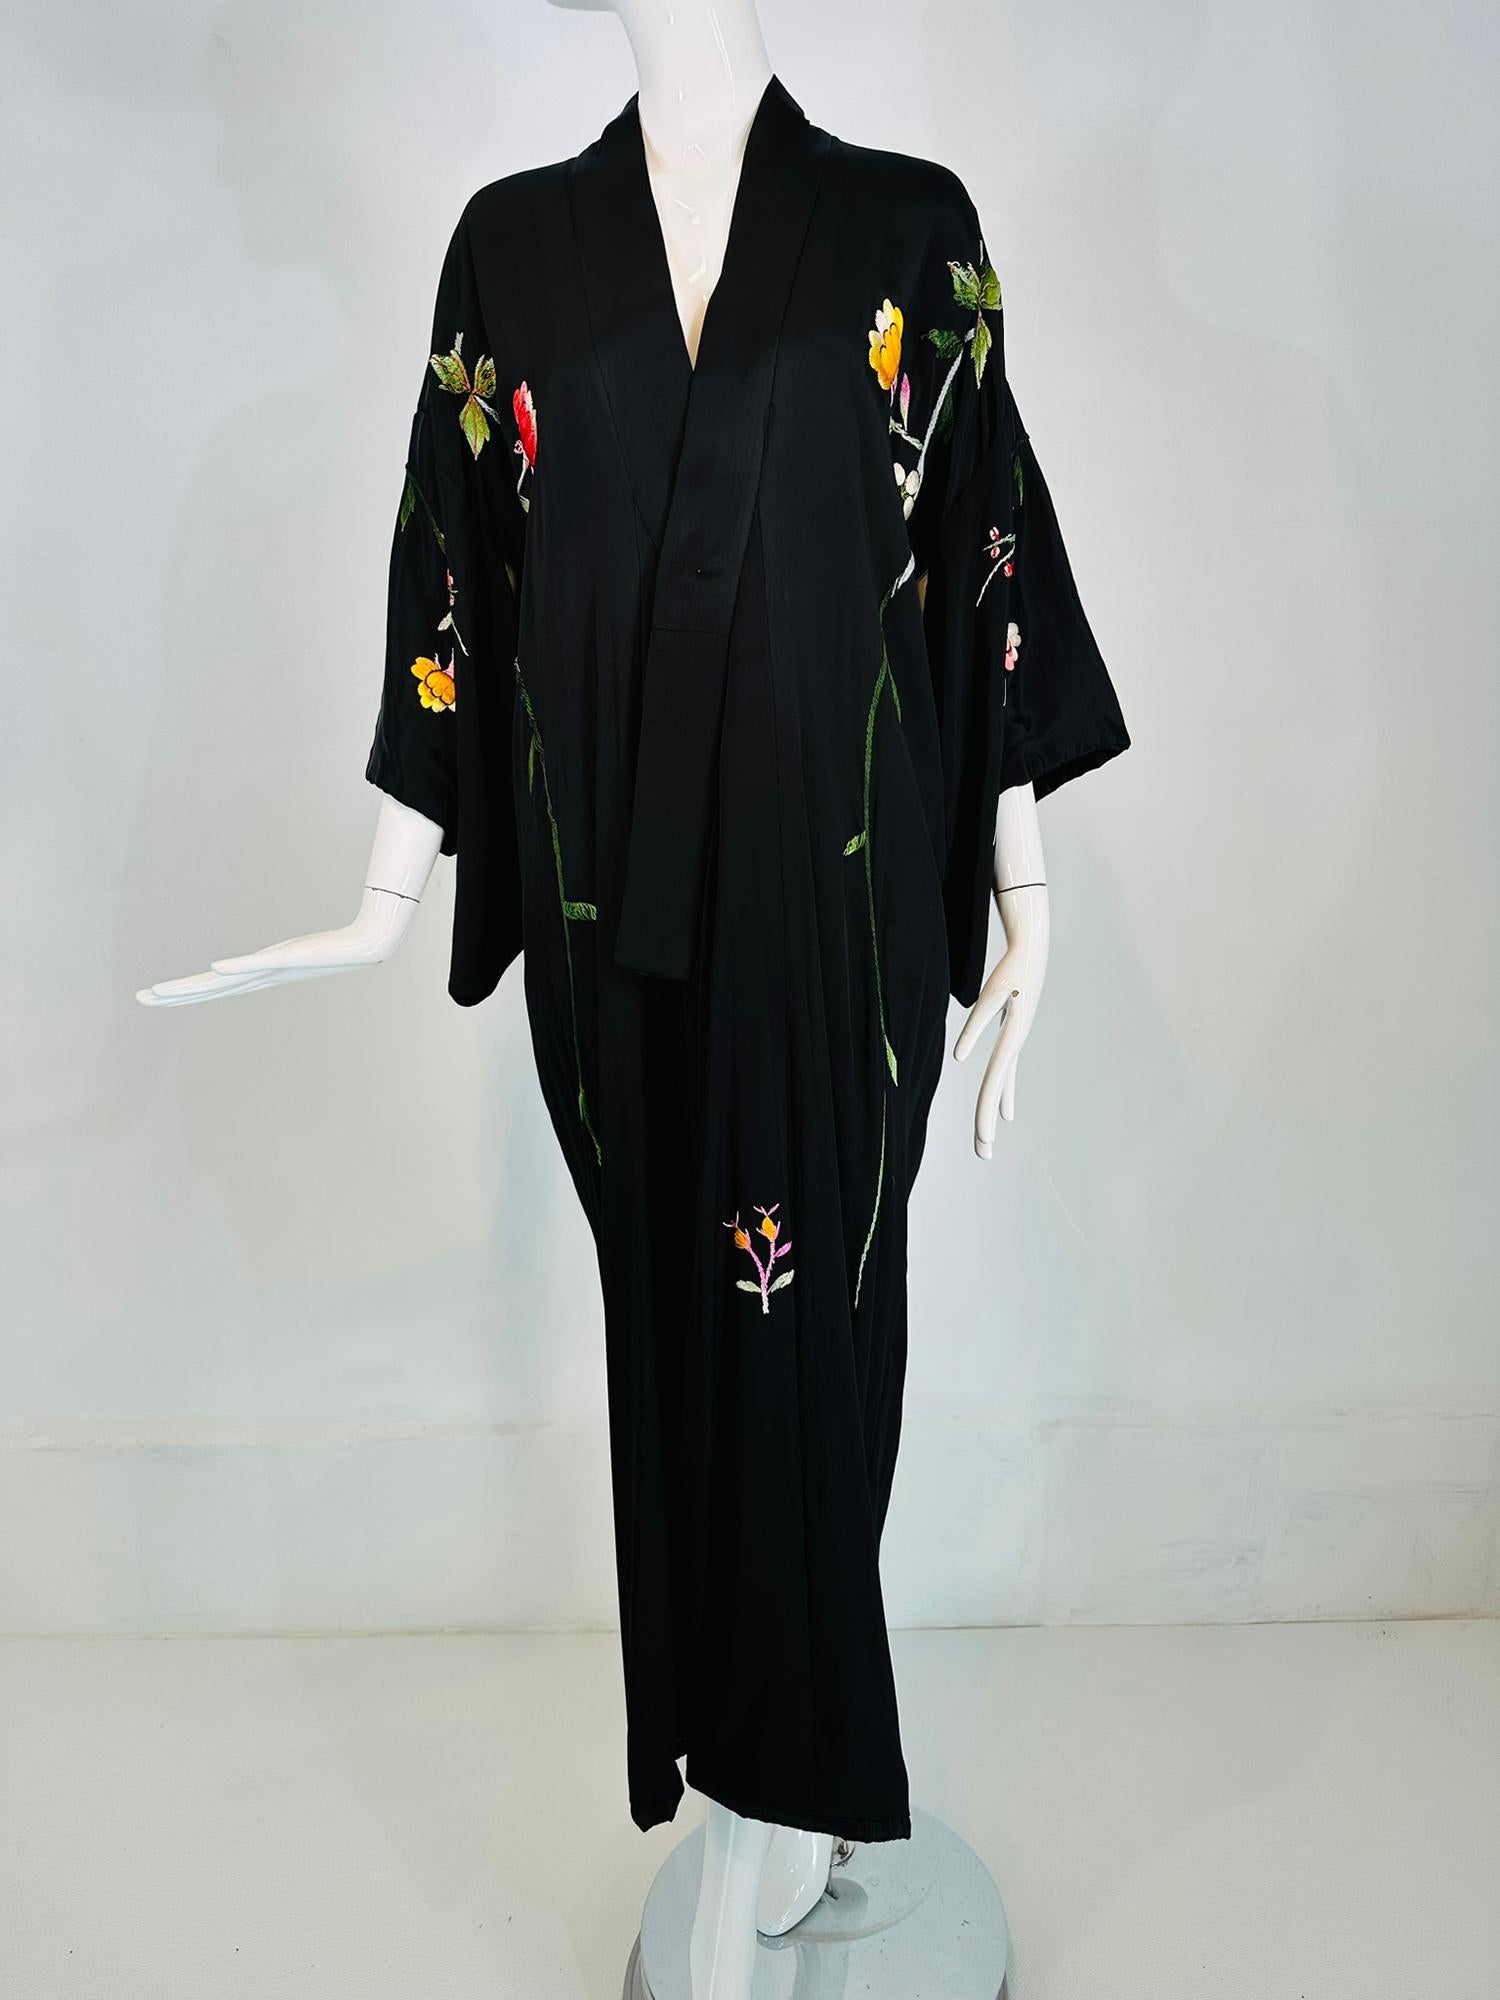 Vintage black rayon heavily floral embroidered kimono robe from the 1930s-40s. Wrap front robe lined in black tissue rayon, with kimono style sleeves that have rolled padded hems. The robe is long. Floral embroidered across front & sleeves. The back